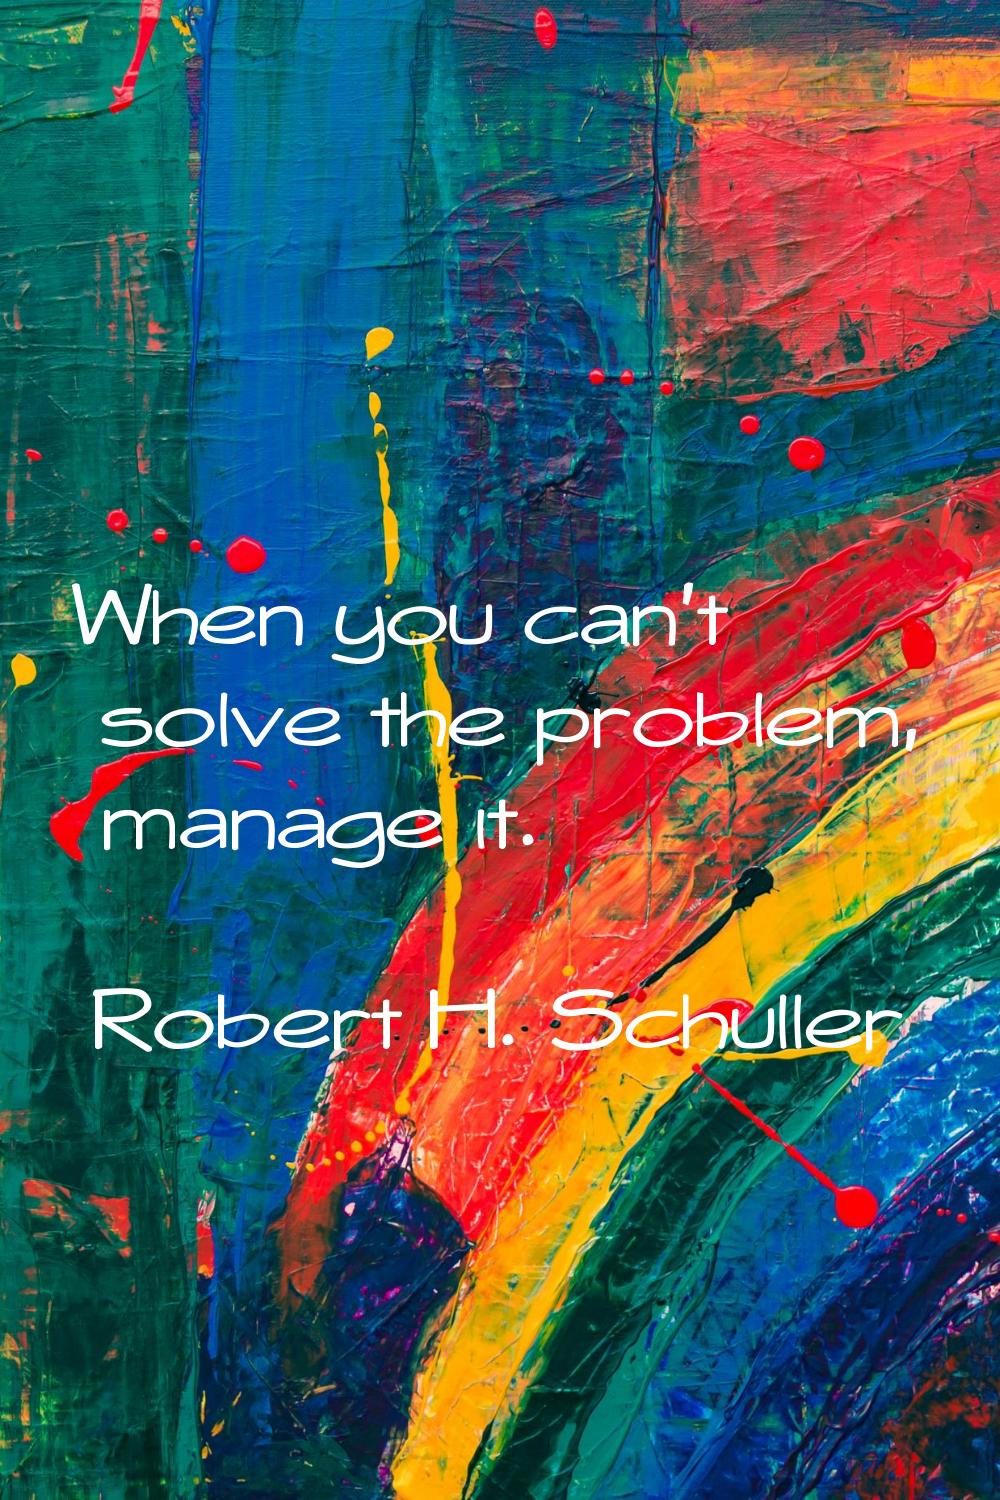 When you can't solve the problem, manage it.